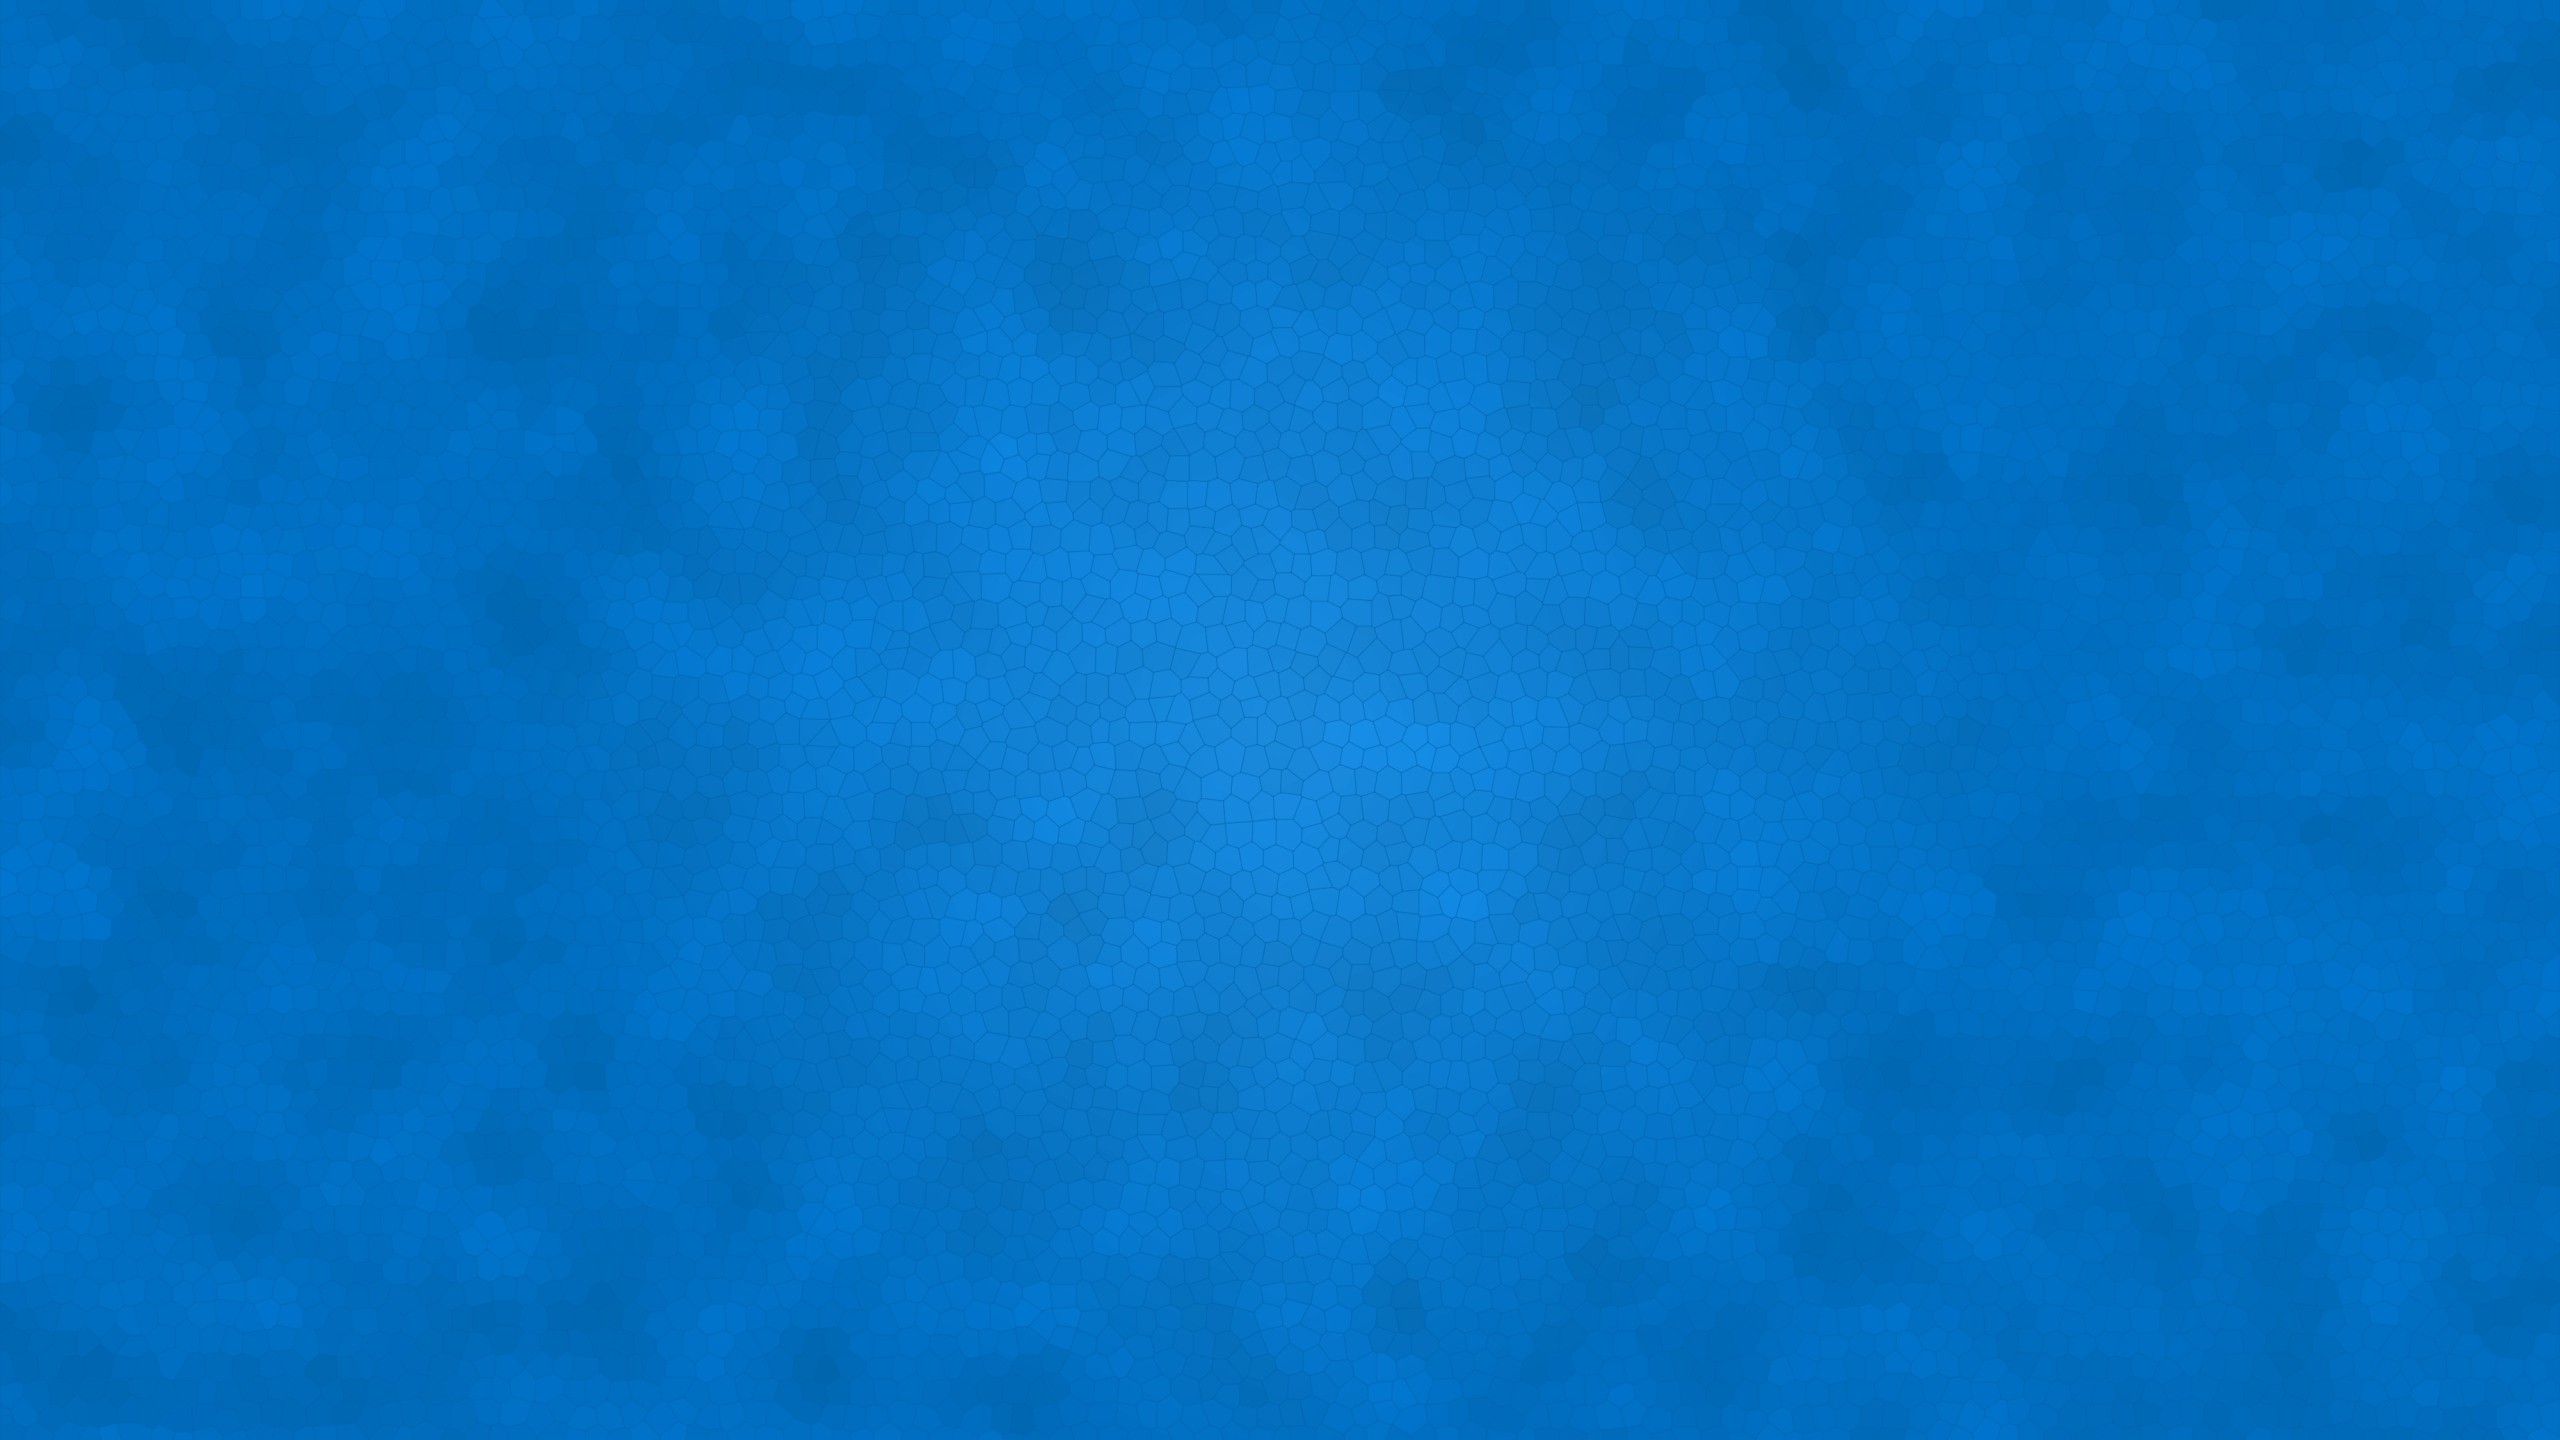 Blue Stained Glass Free Website Background Image